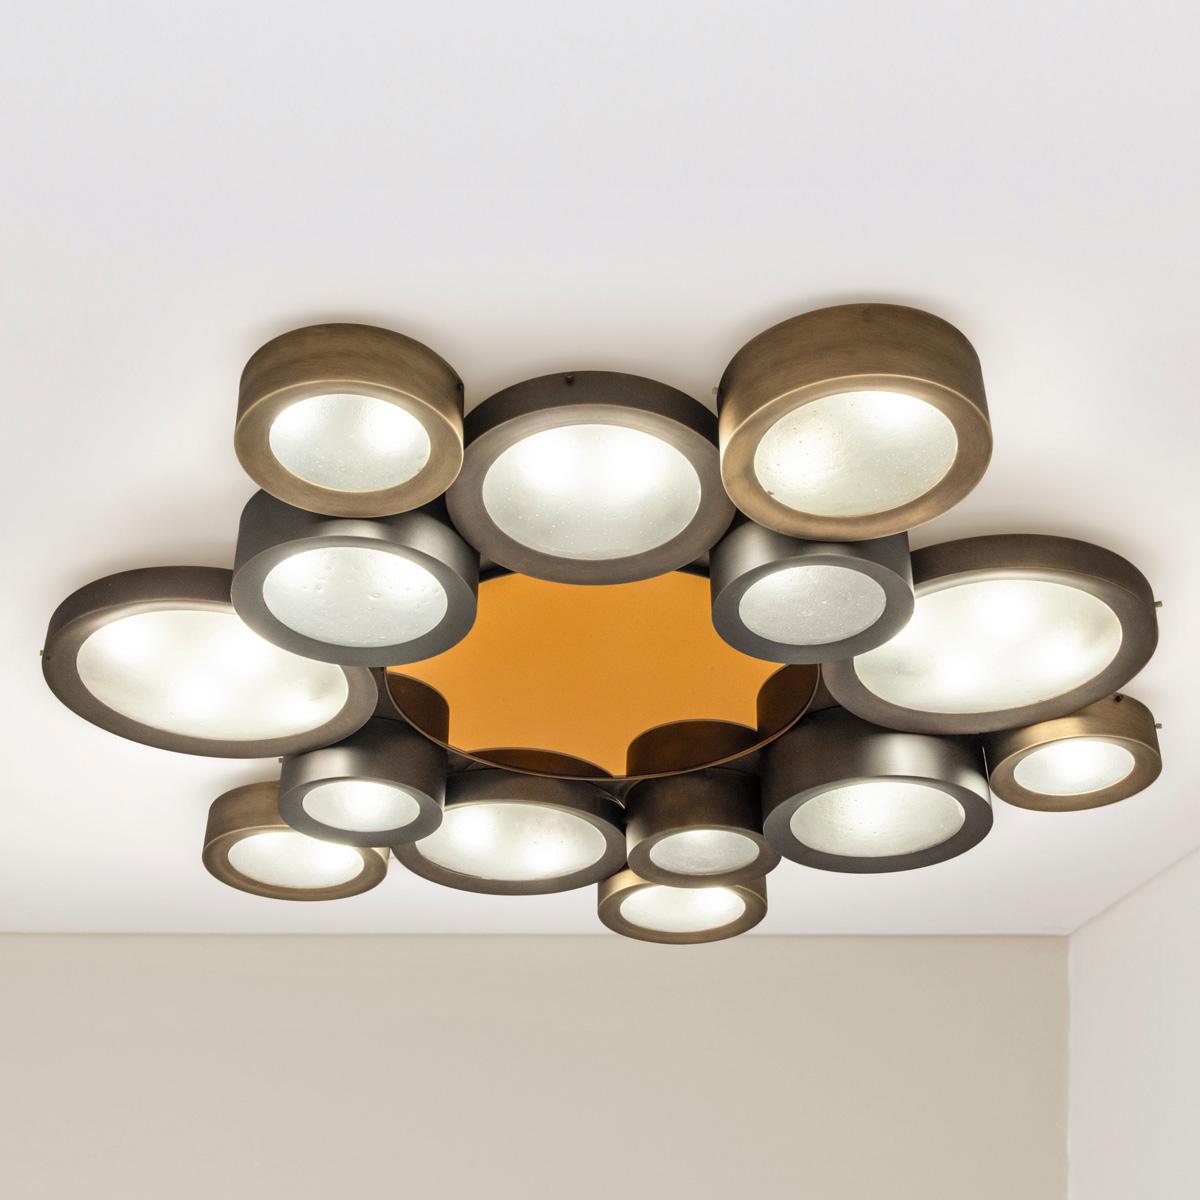 Italian Helios 66 Ceiling Light by Gaspare Asaro-Satin Brass and Satin Nickel Finish For Sale